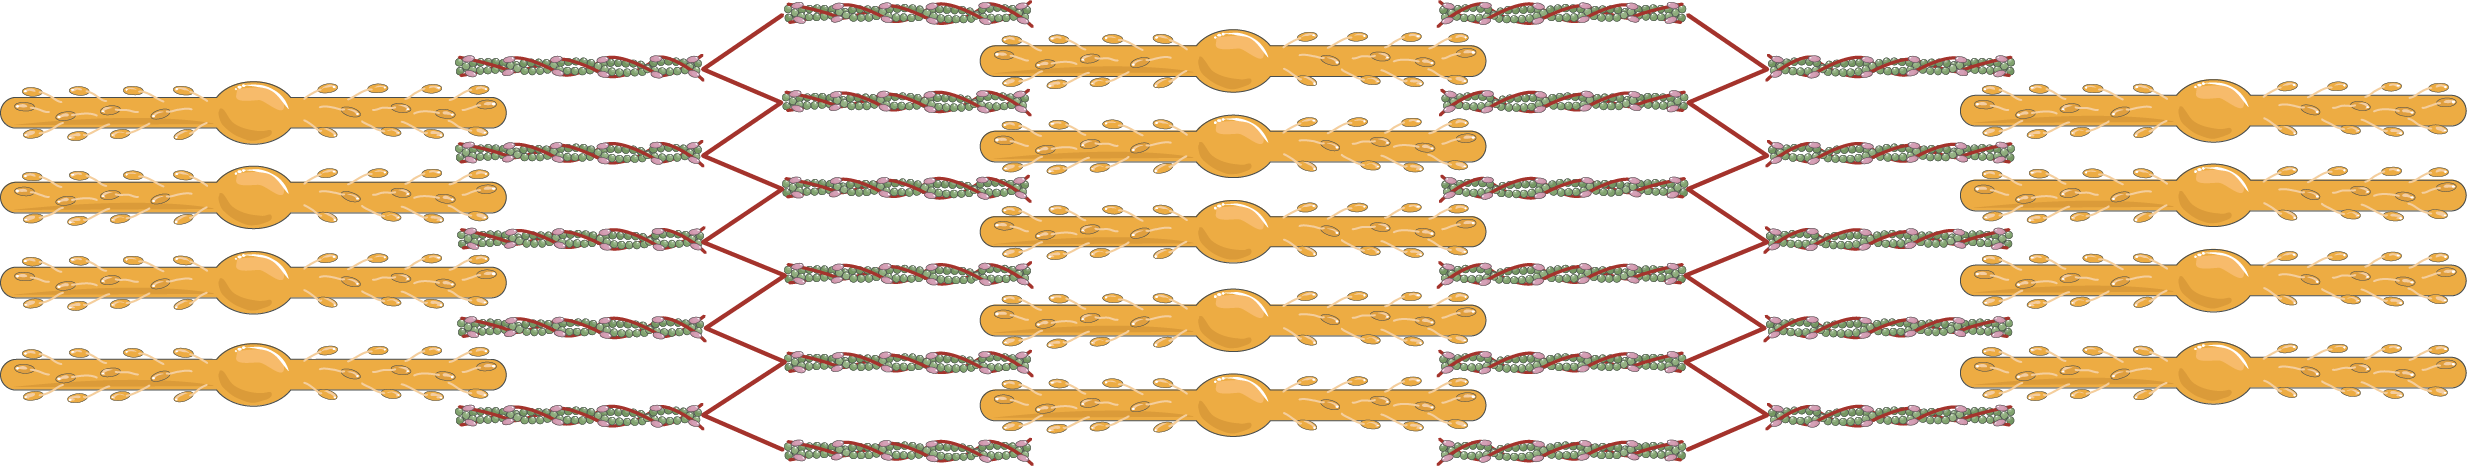 muscle clipart muscle contraction